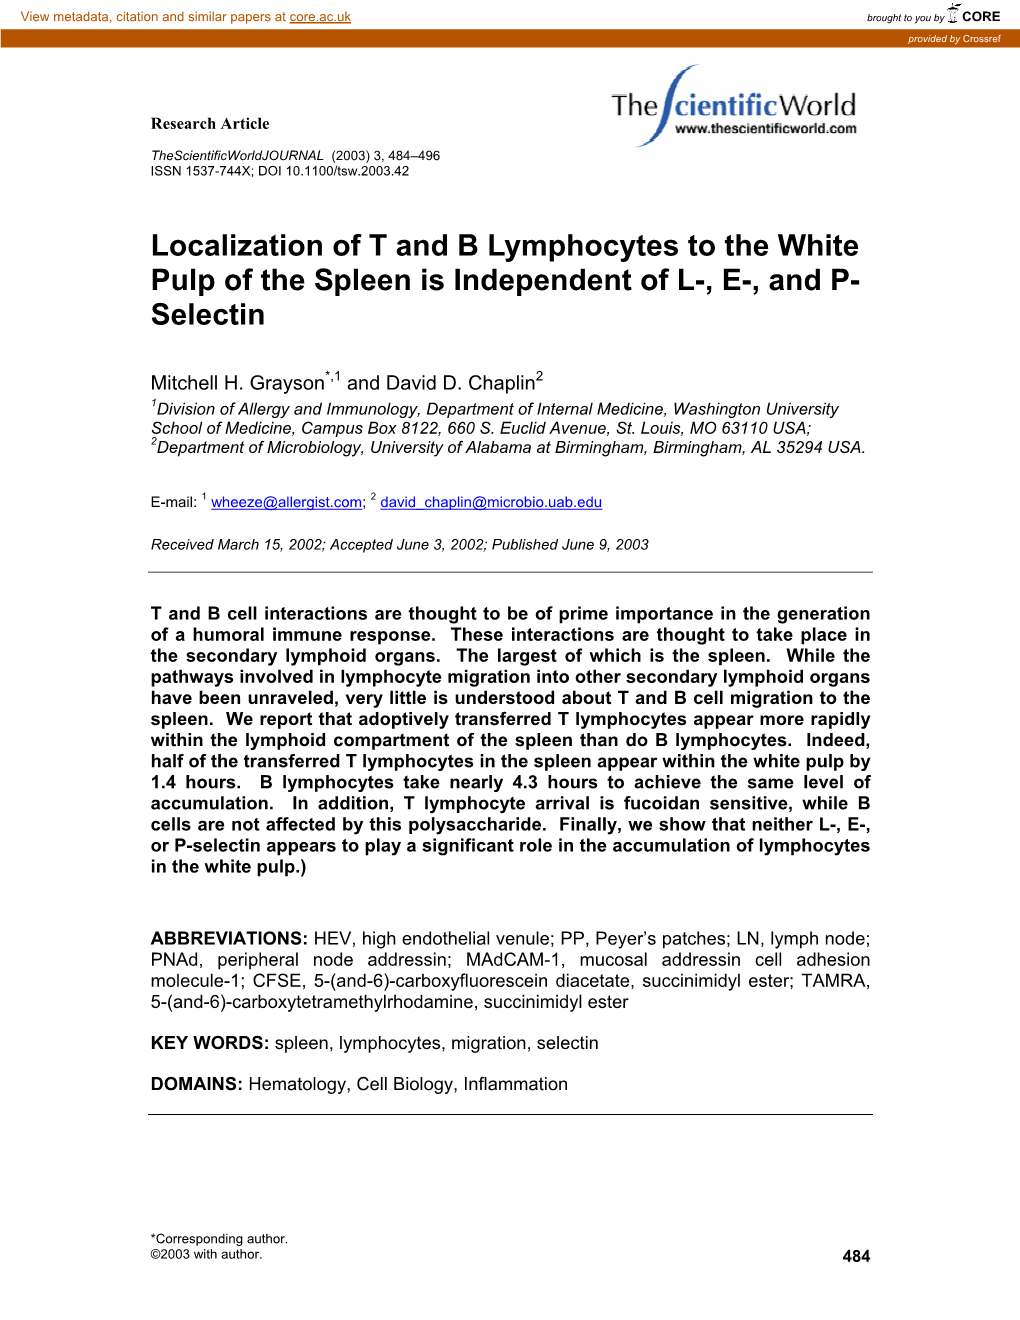 Localization of T and B Lymphocytes to the White Pulp of the Spleen Is Independent of L-, E-, and P- Selectin